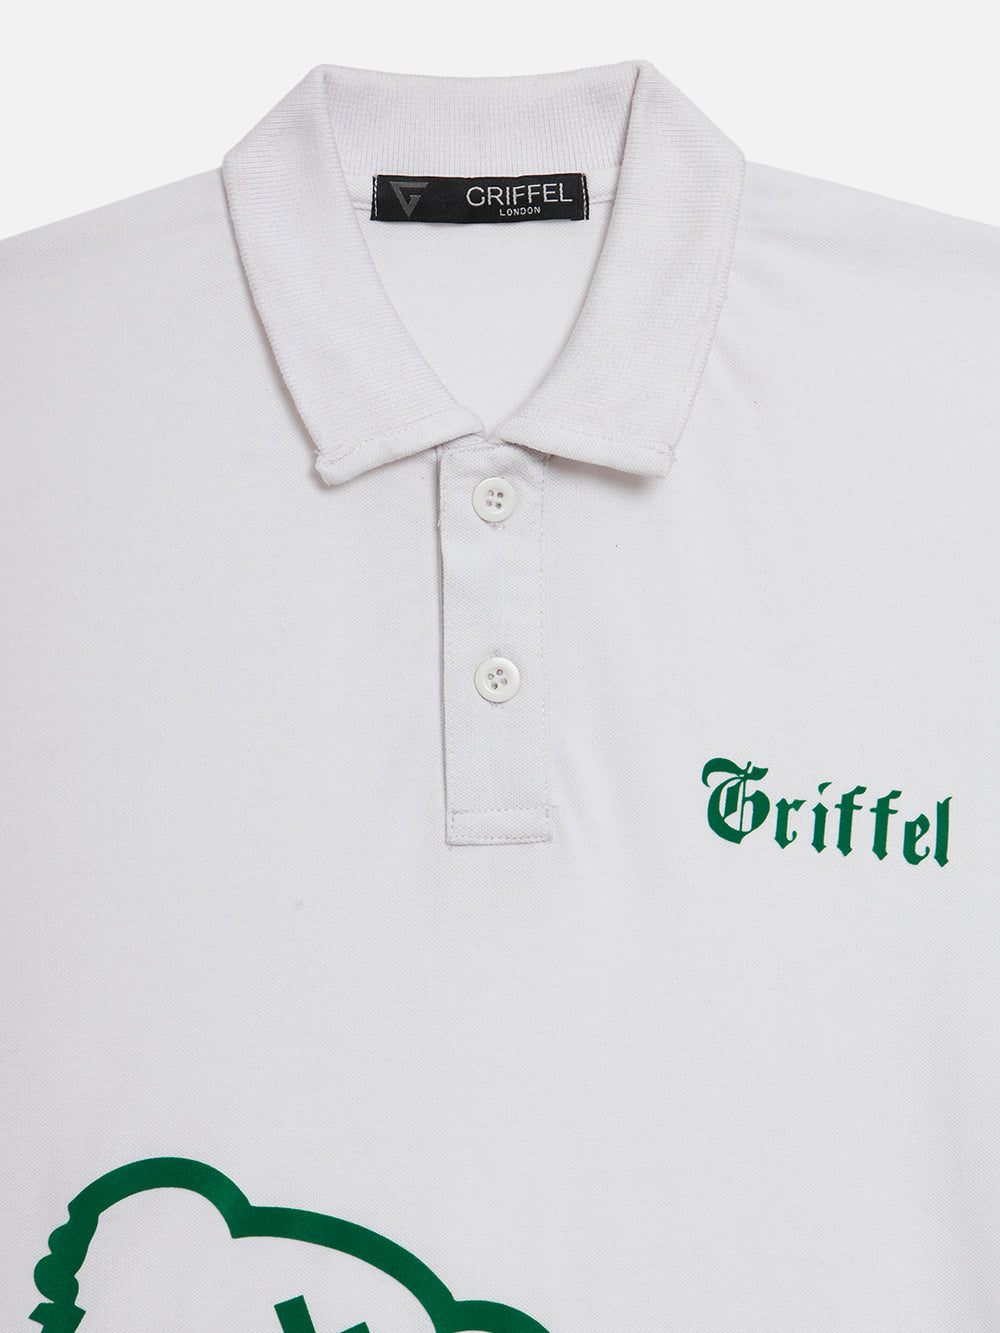 GRIFFEL Girls Kids White Printed Polo T-shirt - griffel